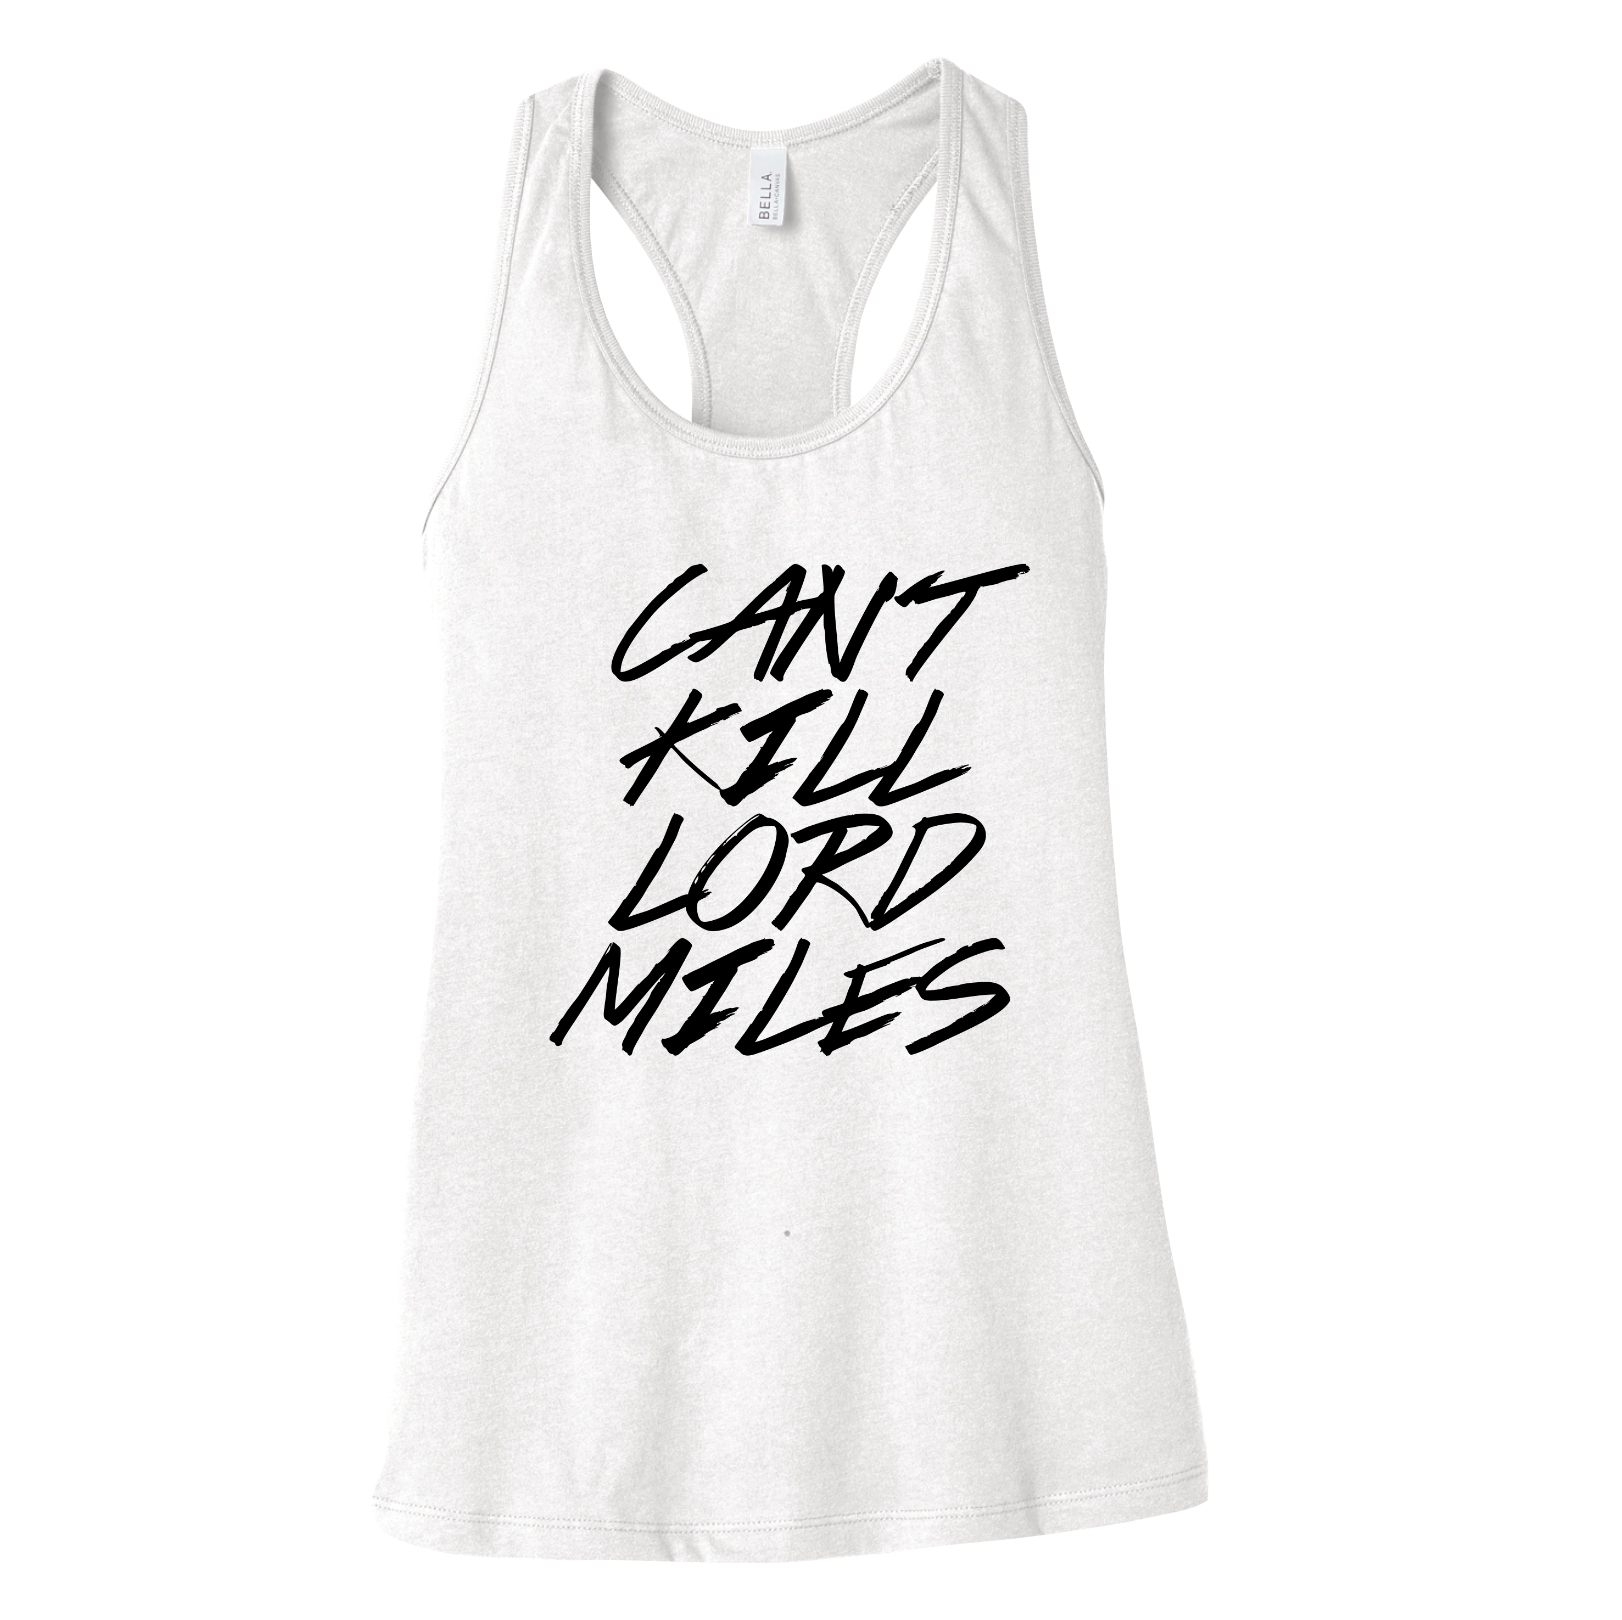 Cant Kill Lord Miles (White) Tanktop-5